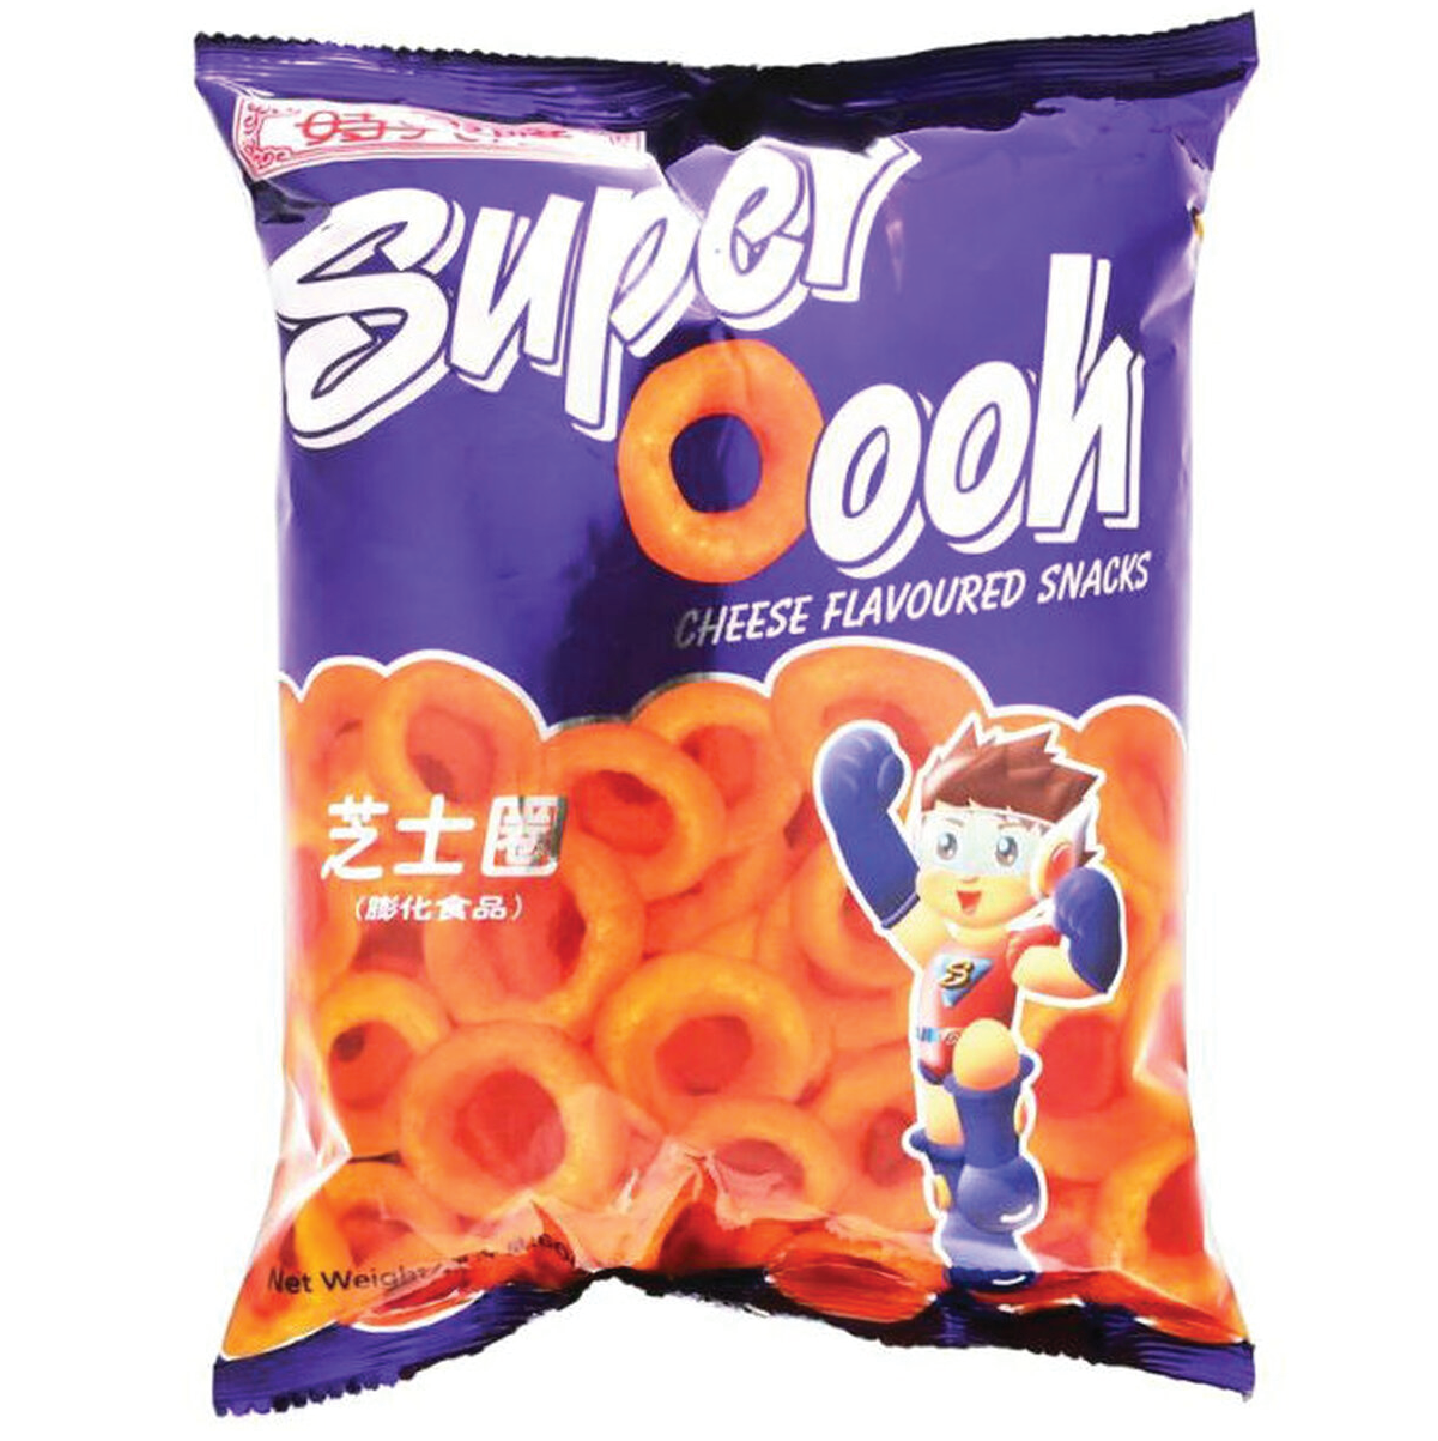 SHL SUPER OOOH CHEESE FLVOUR SNACK 60G 時興隆 芝士圈 60G